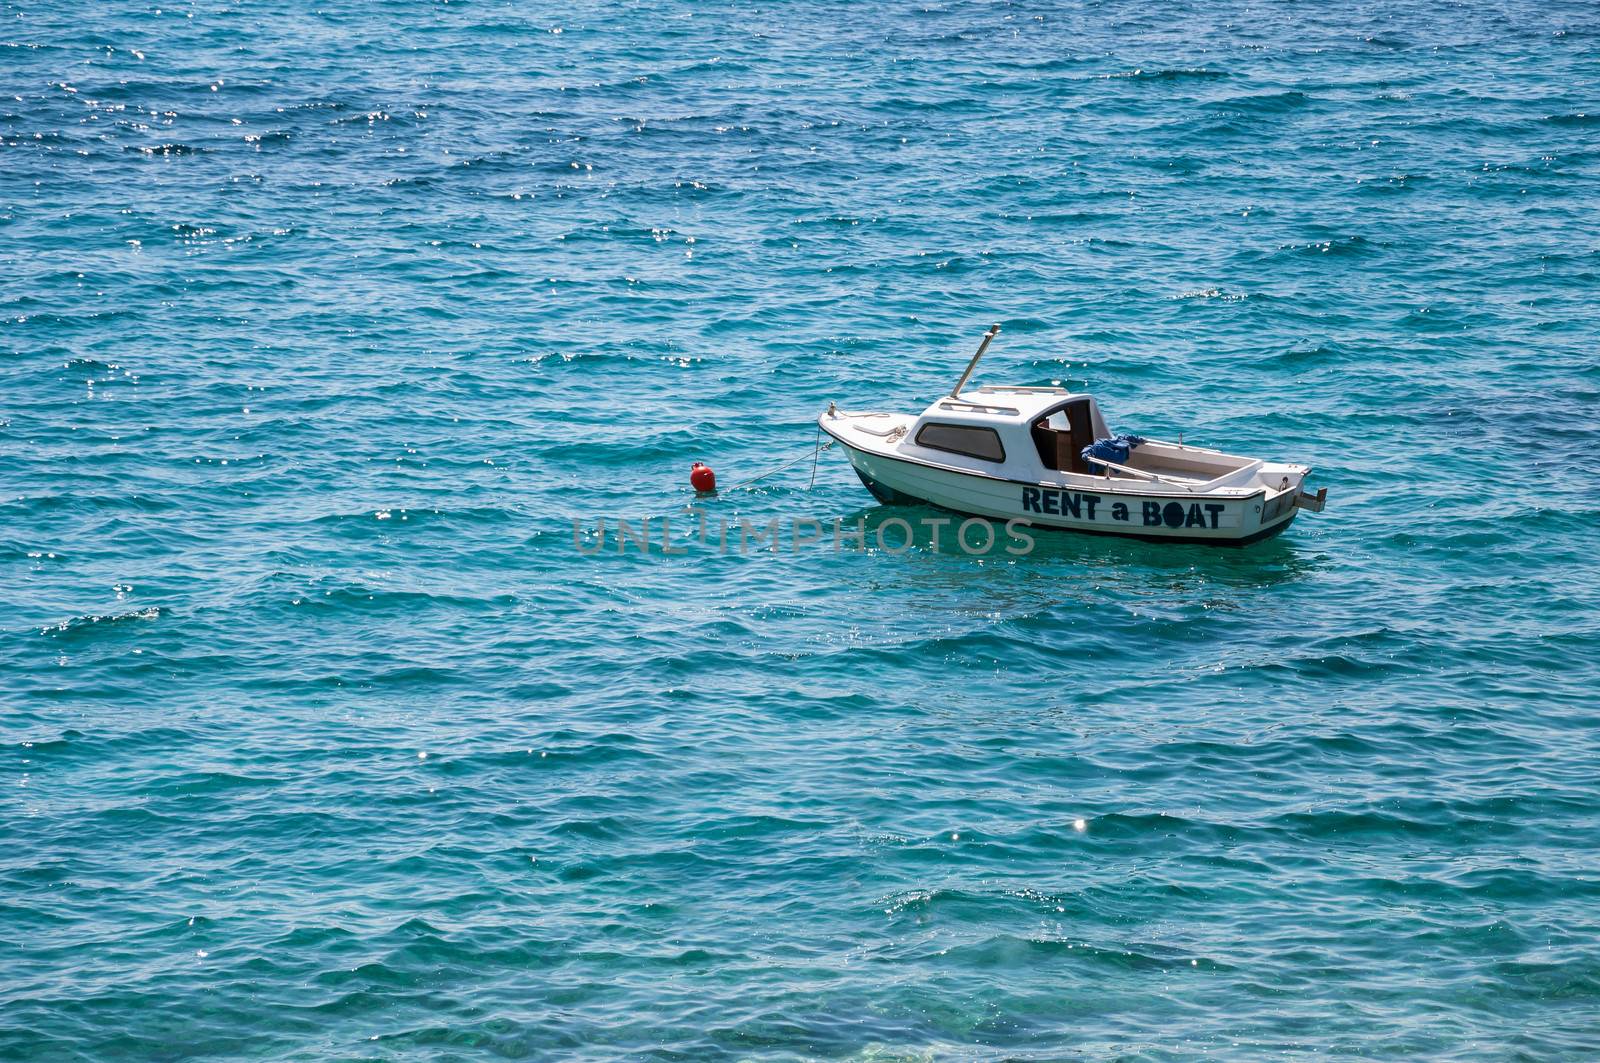 Boat for rent on a turquoise sea.